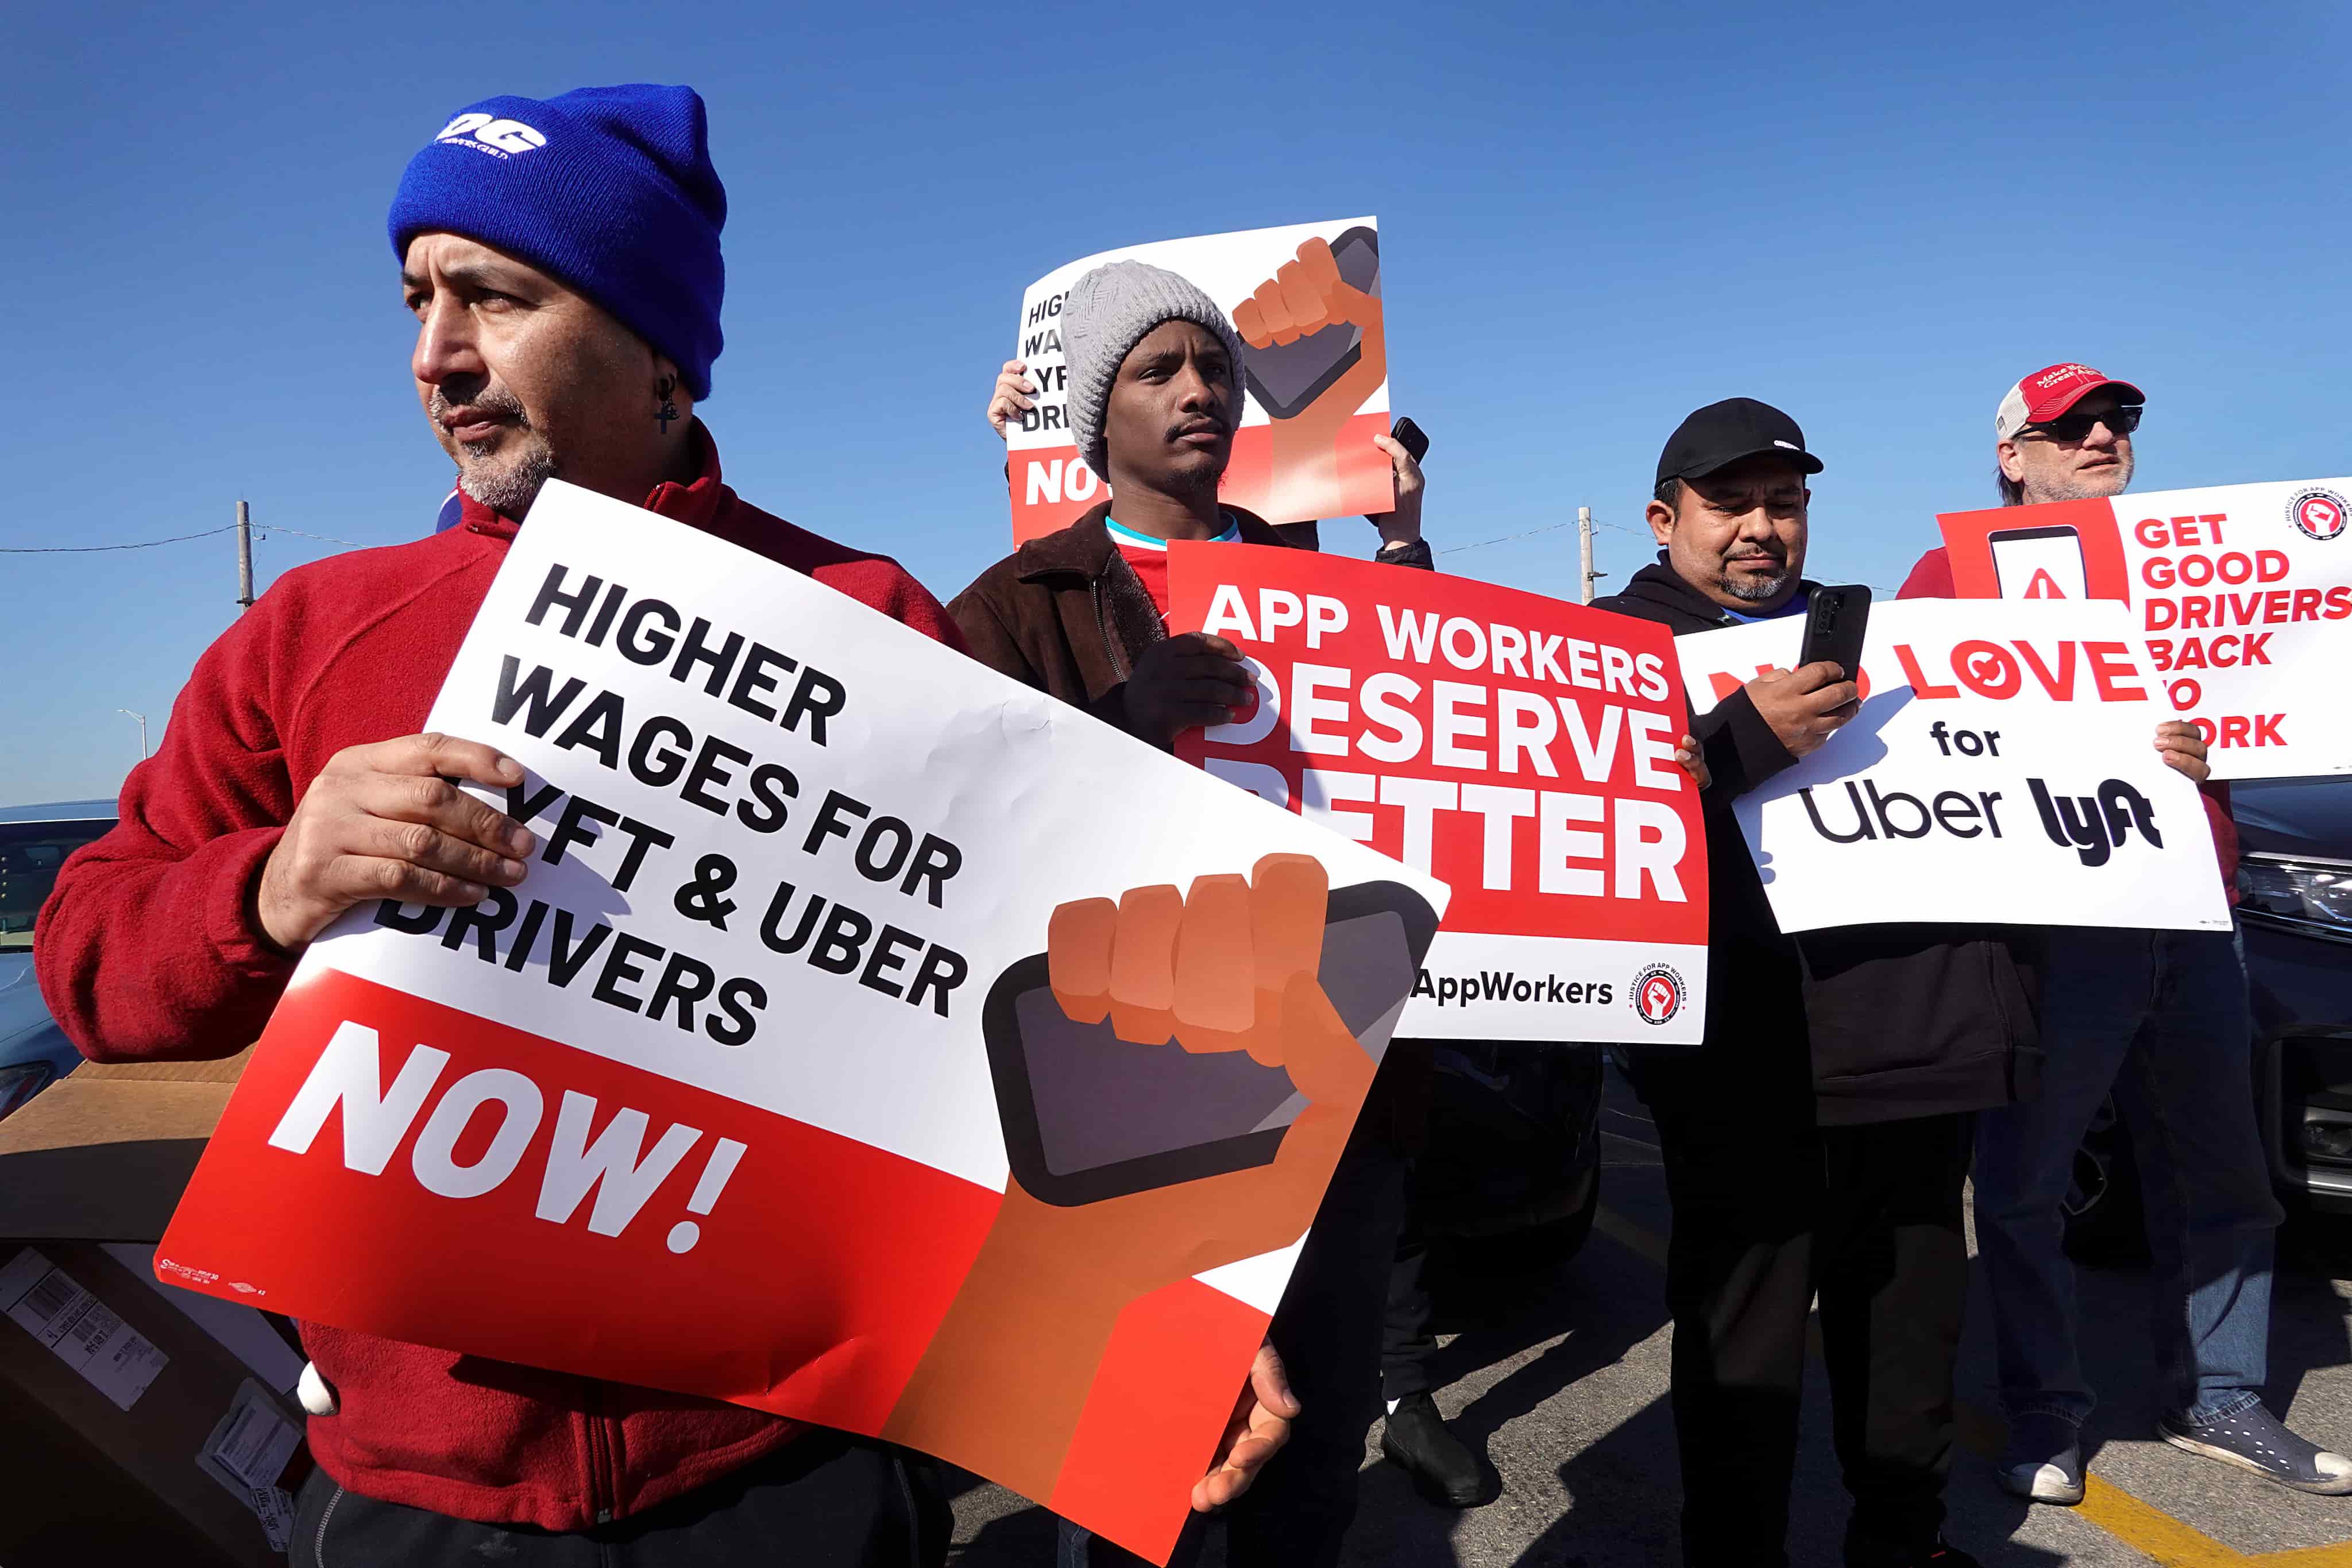 Ride App Drivers in US, UK Hold Valentine's Day Strike